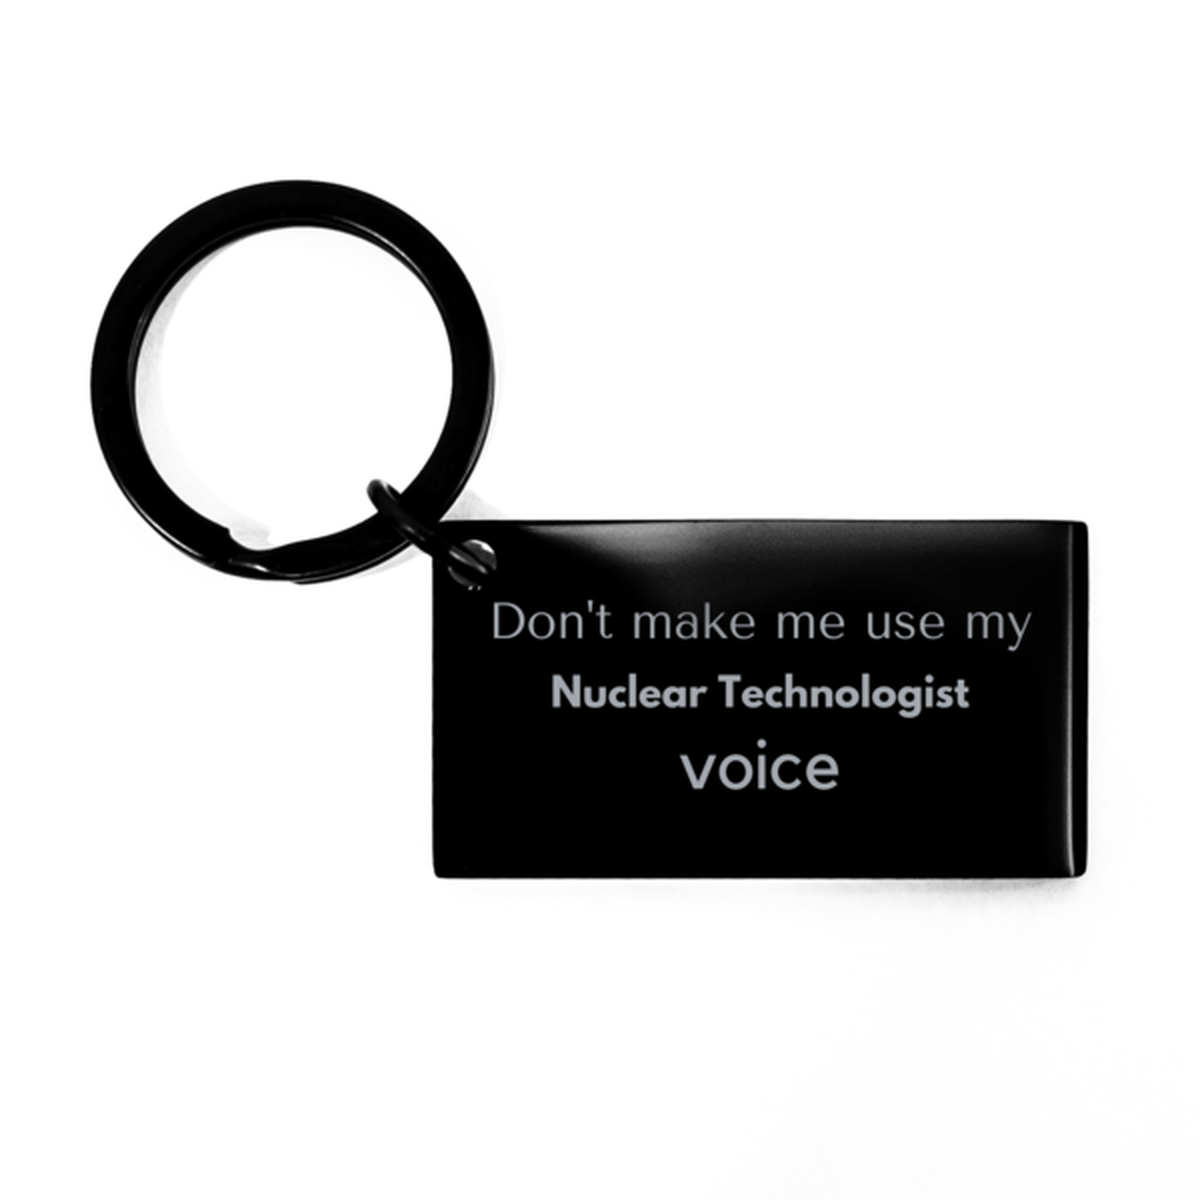 Don't make me use my Nuclear Technologist voice, Sarcasm Nuclear Technologist Gifts, Christmas Nuclear Technologist Keychain Birthday Unique Gifts For Nuclear Technologist Coworkers, Men, Women, Colleague, Friends